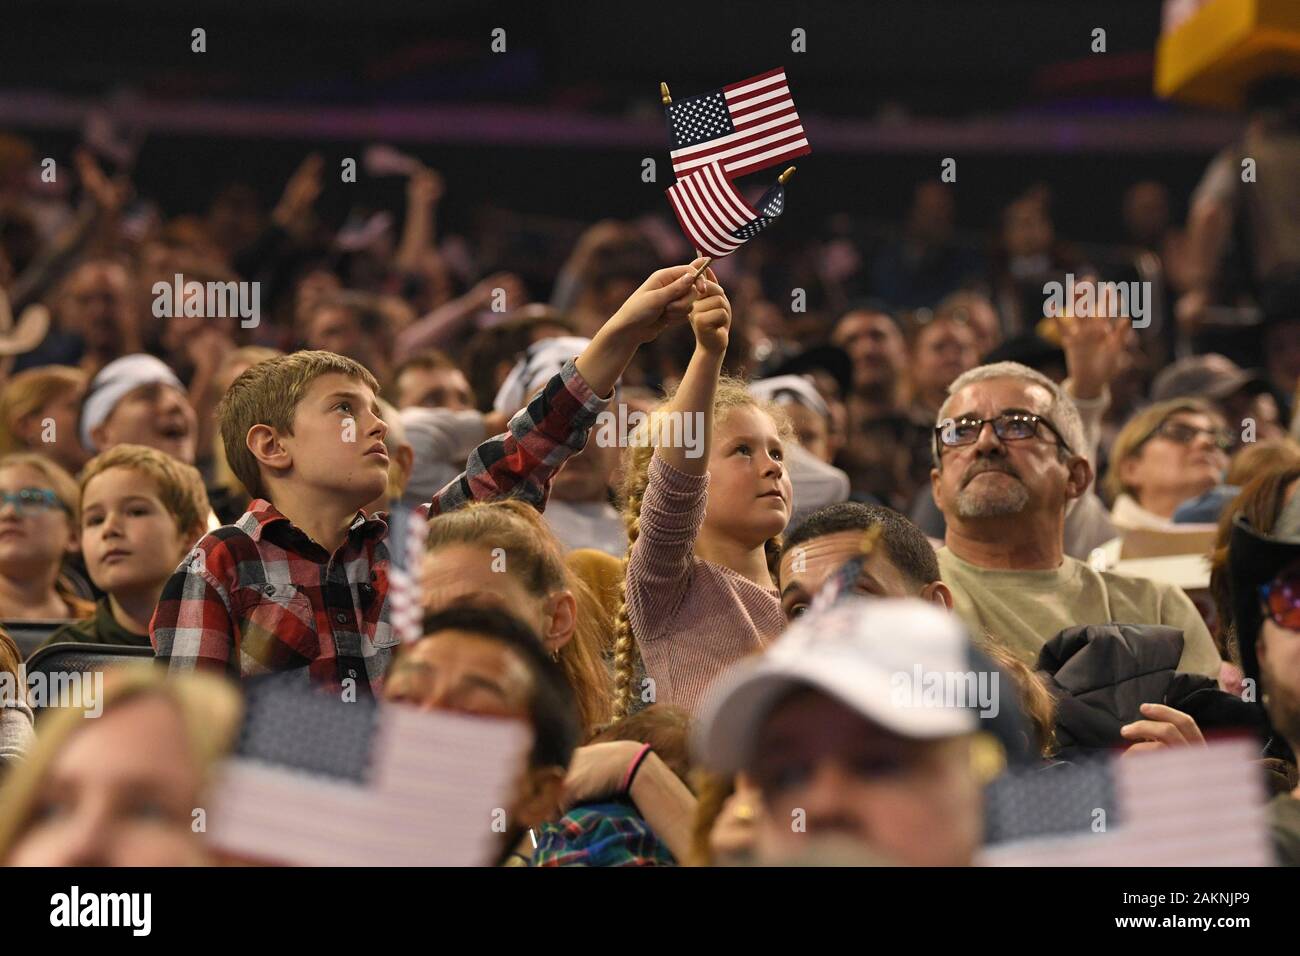 Spectators Hold Us Flags During The Professional Bull Riders 2020